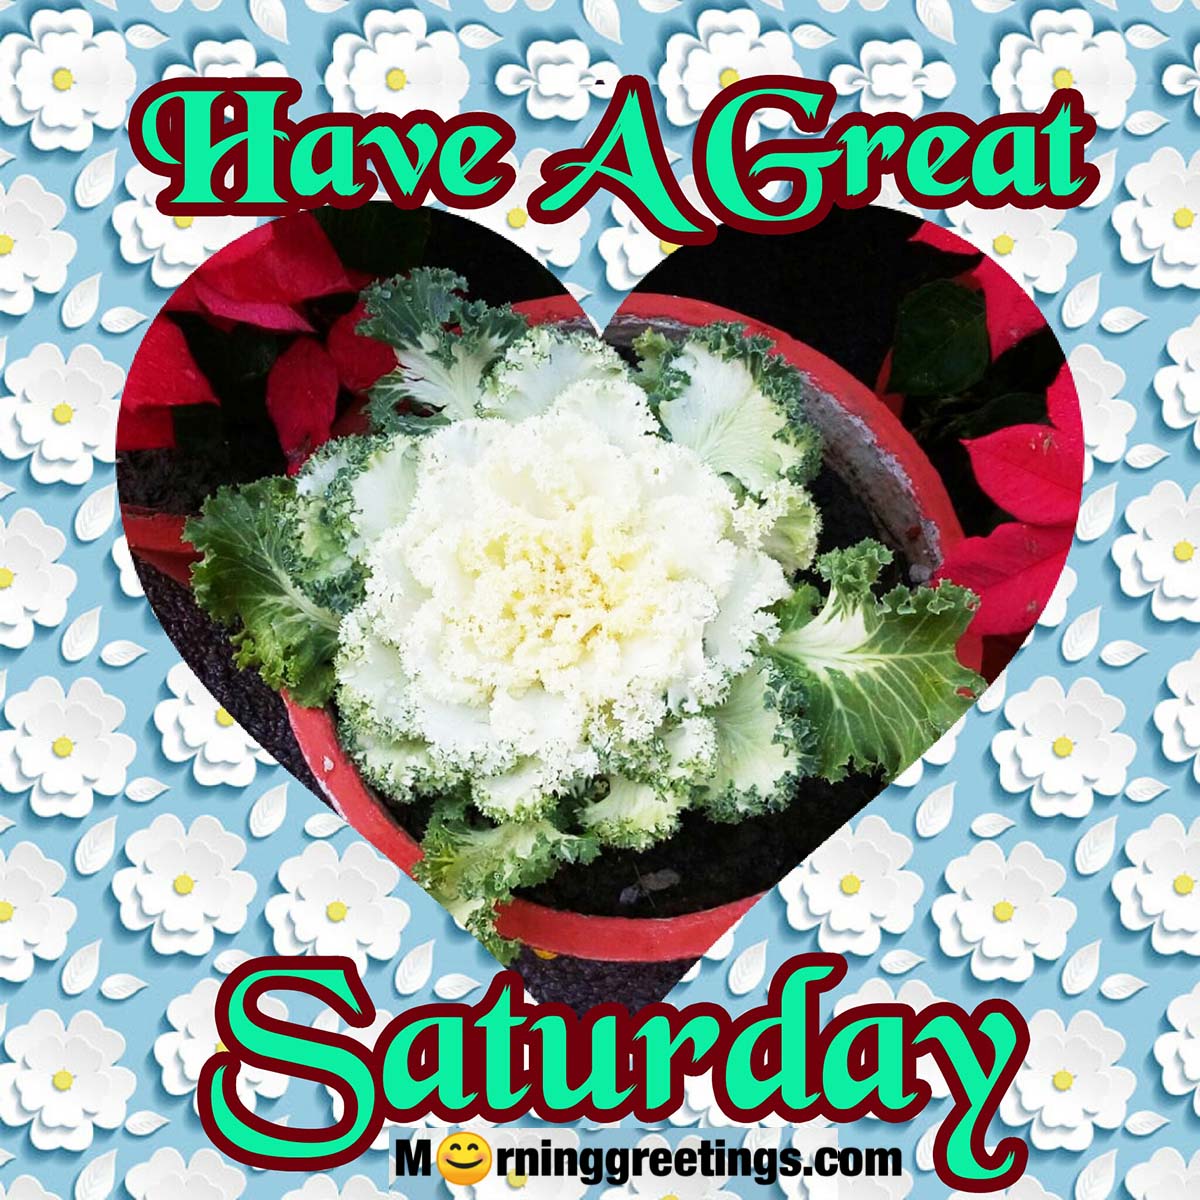 Have A Great Saturday